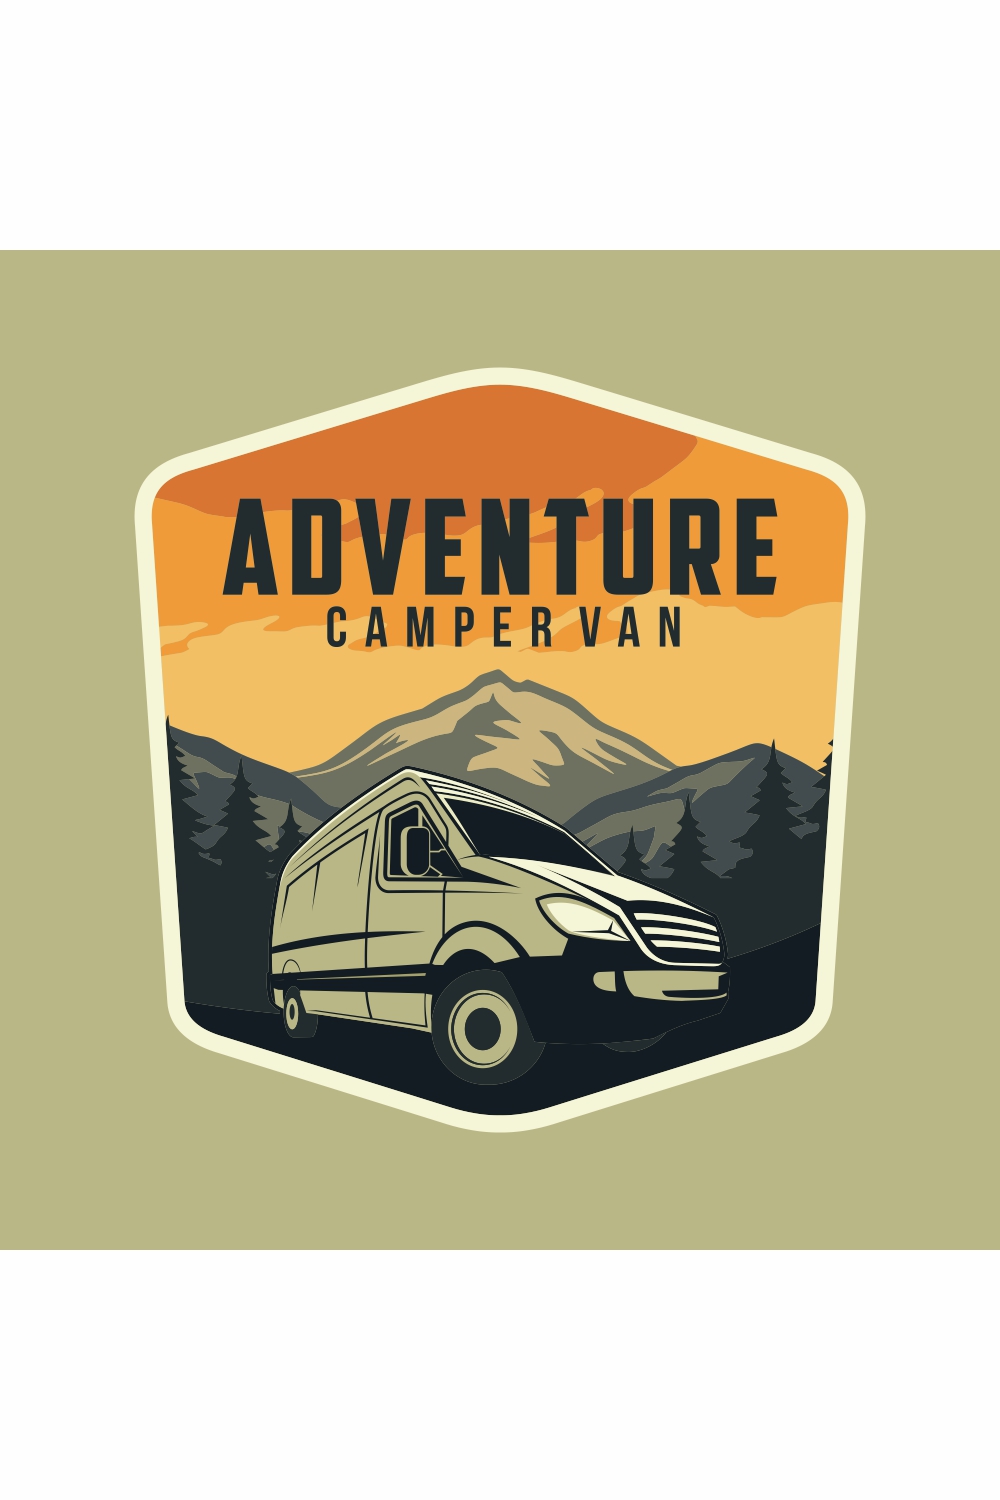 Camper van or recreational vehicle (RV) adventure car logo template, travel and recreation vector design - only 10$ pinterest preview image.